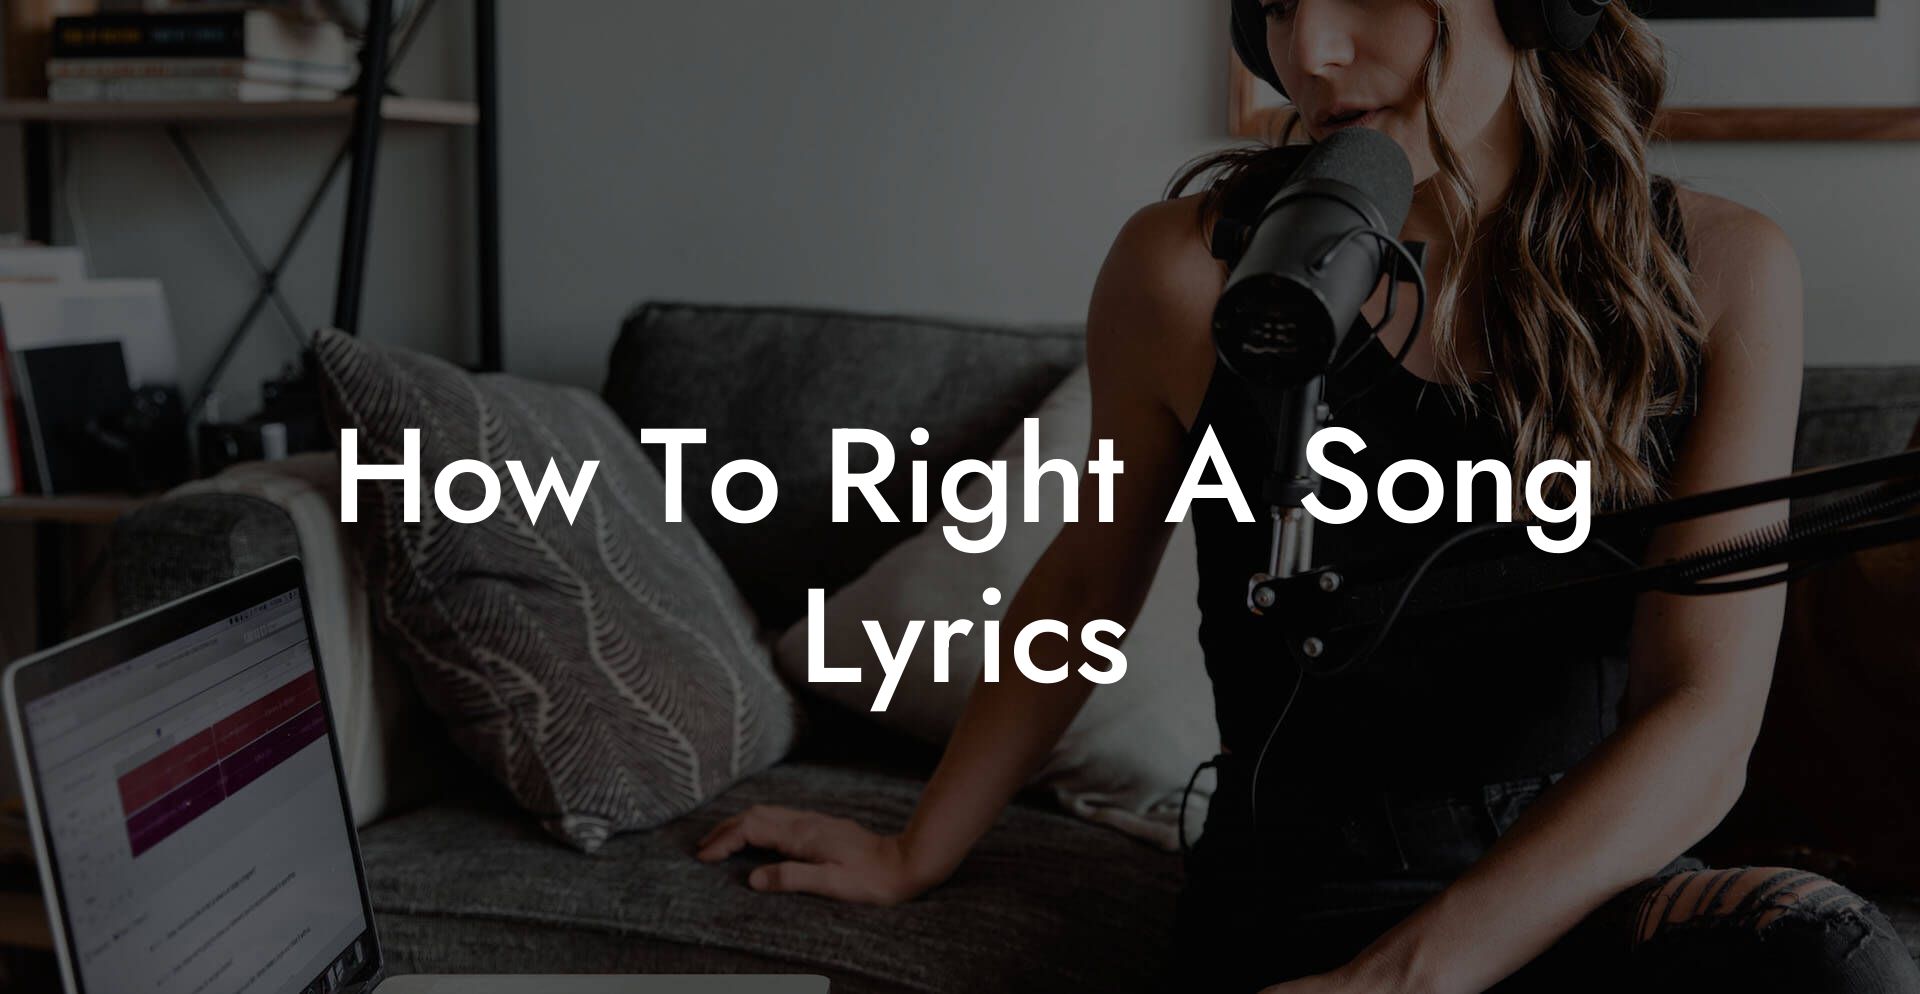 how to right a song lyrics lyric assistant